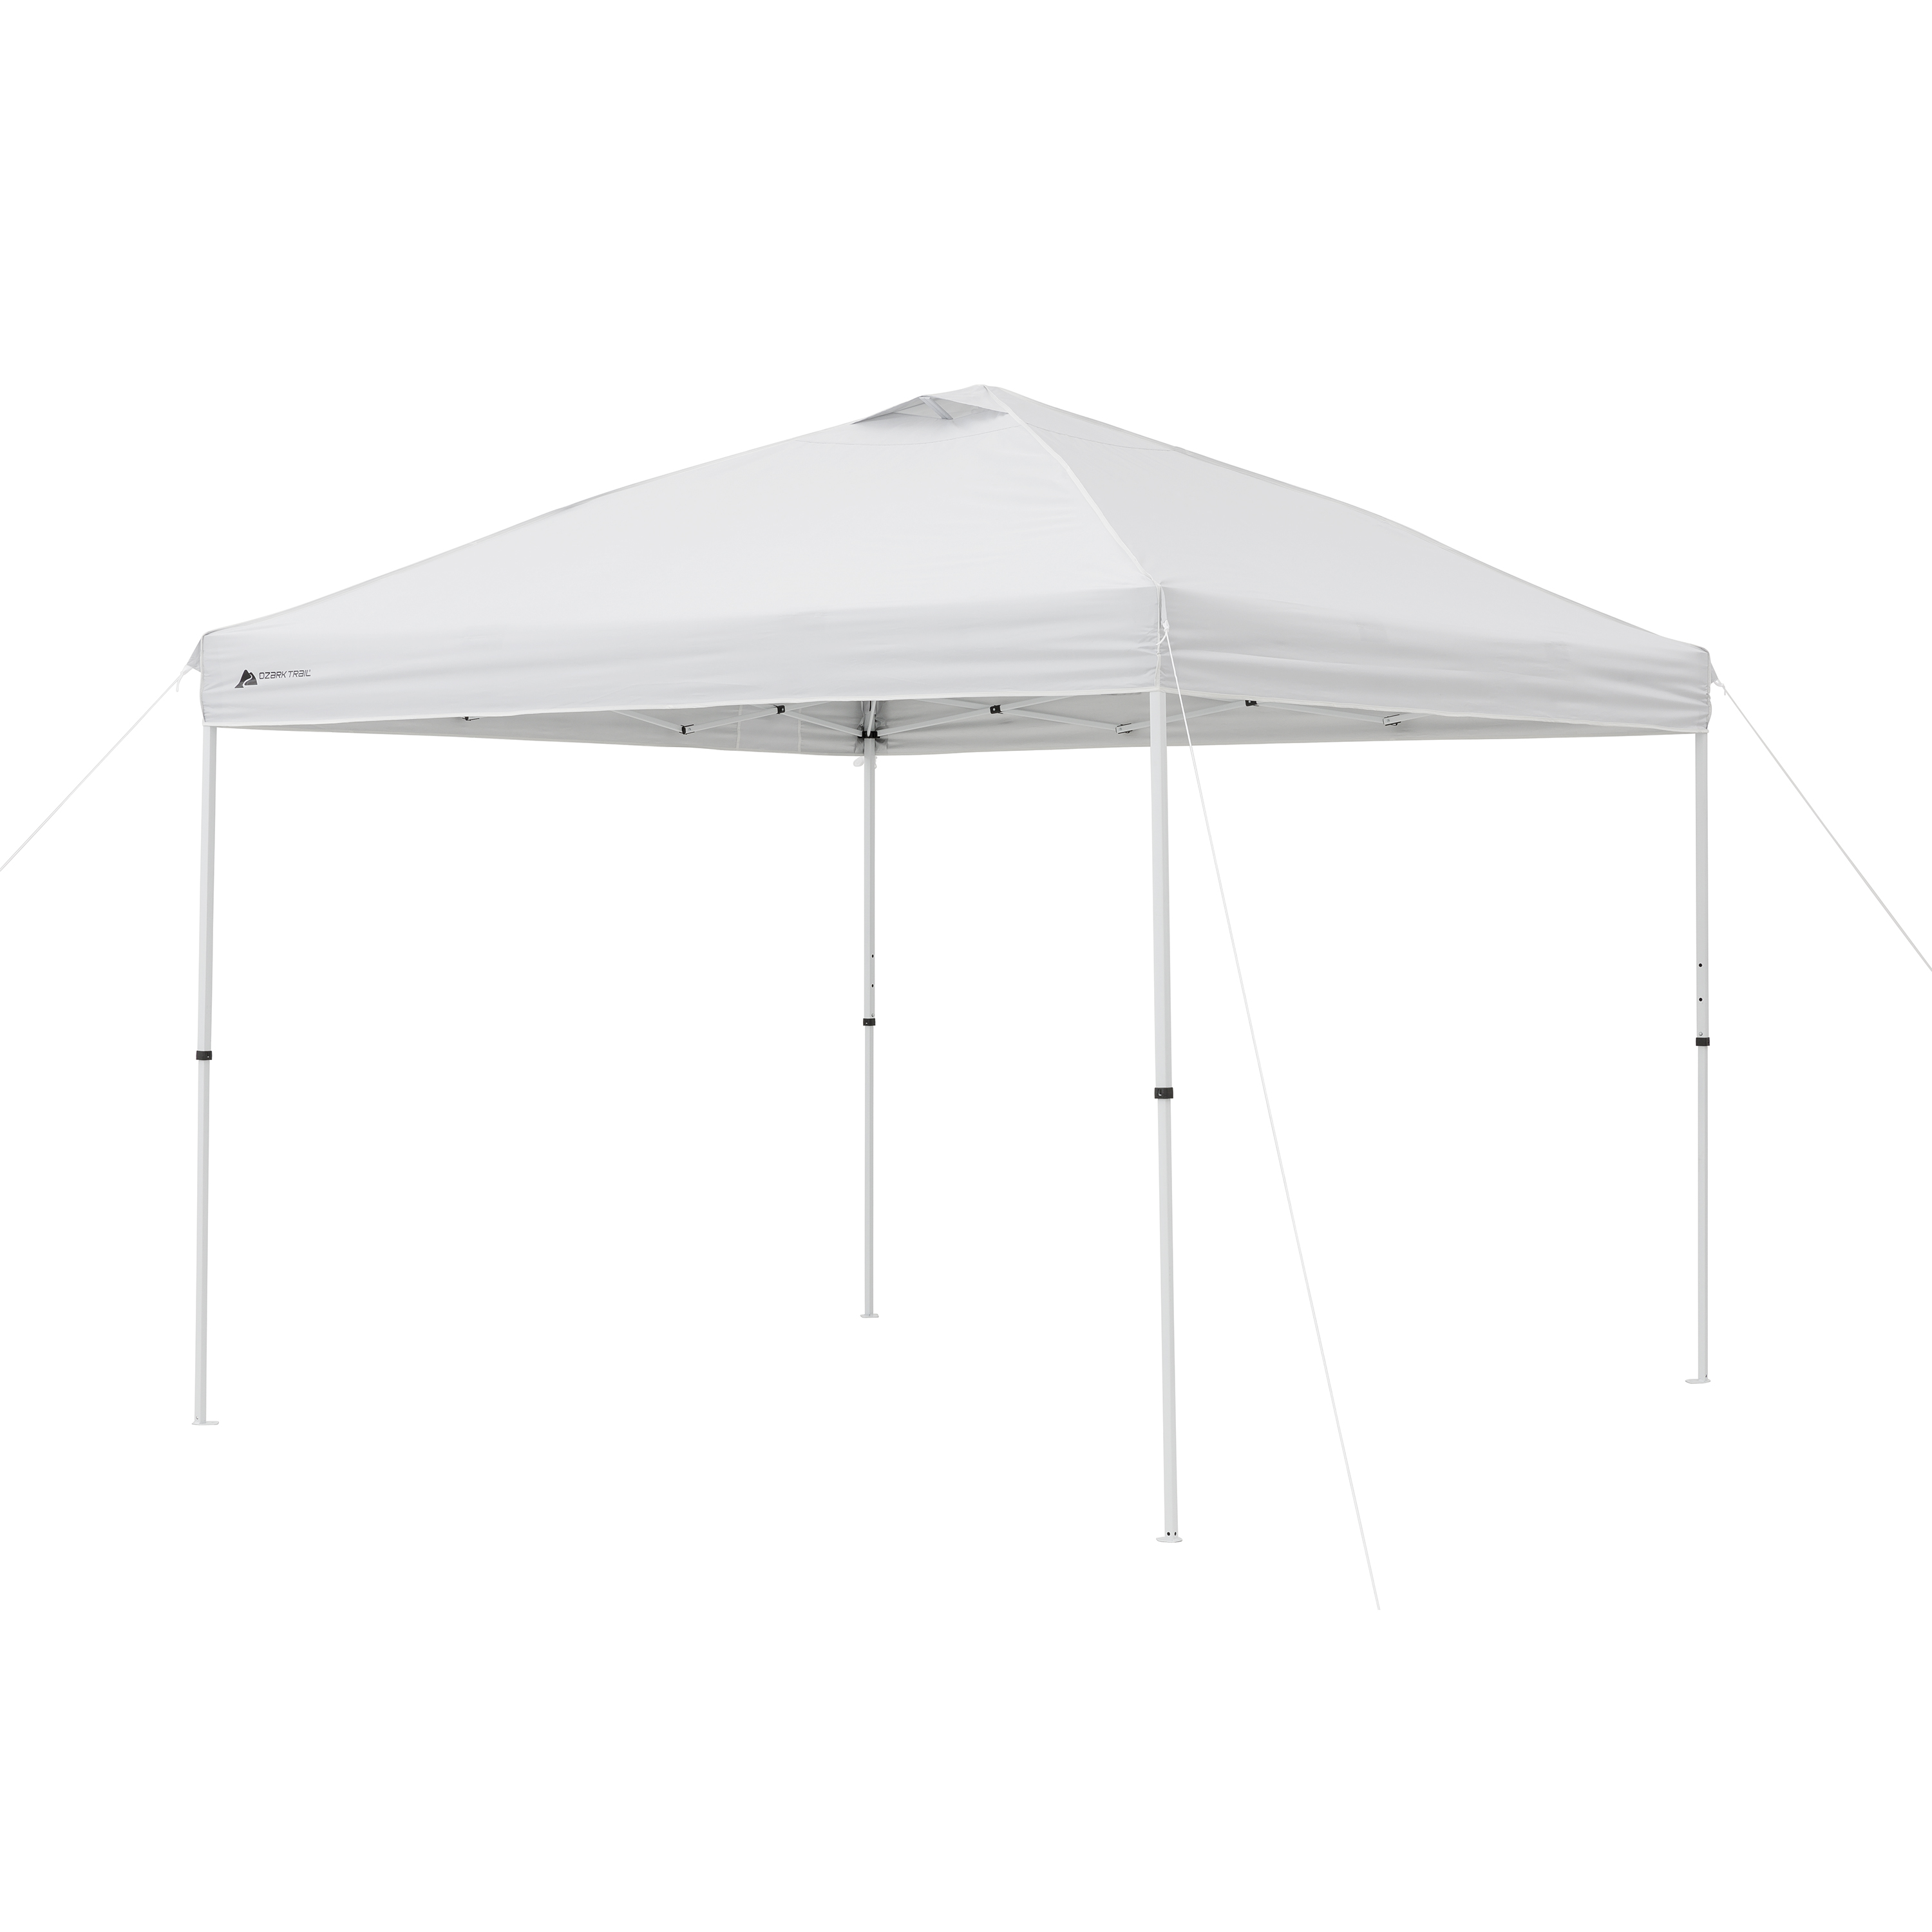 Ozark Trail Simple Push Straight Leg Instant Canopy, White, 10 ft x 10 ft - image 1 of 16